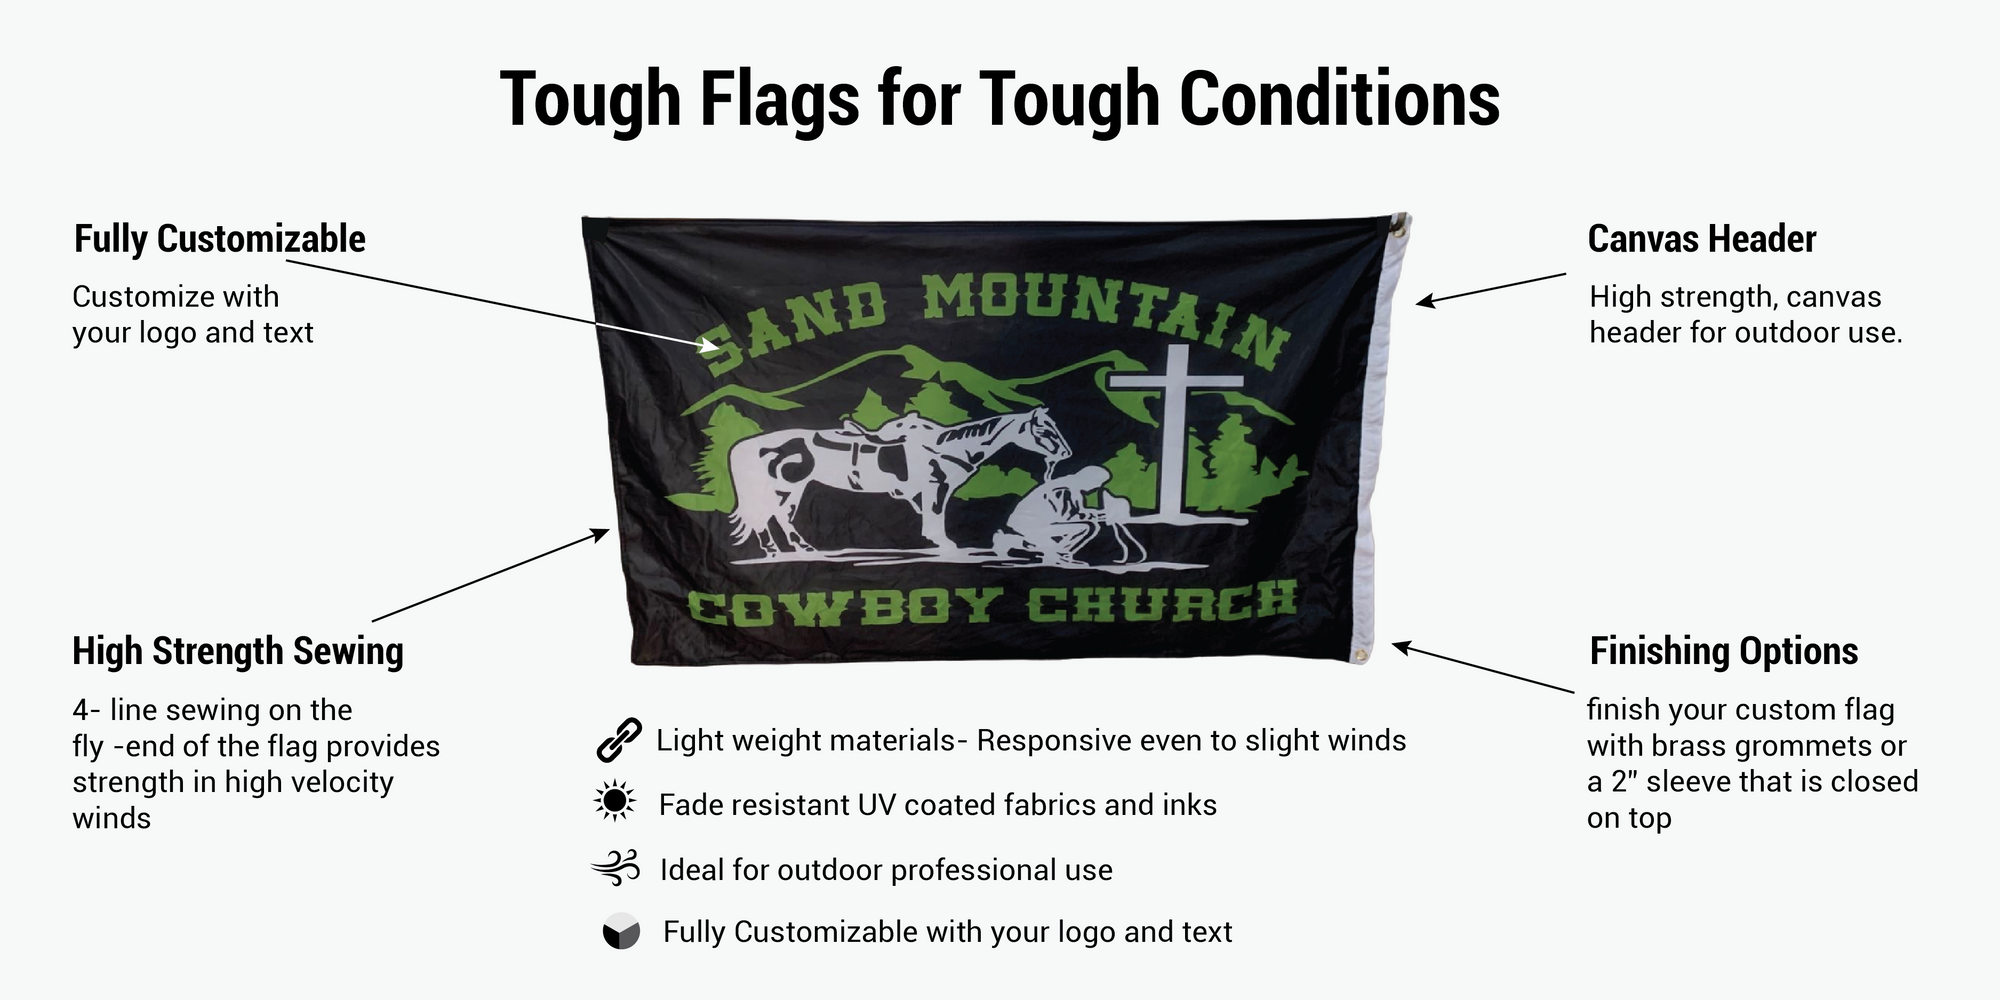 Custom printed flags infographic for outdoor use. Great for rodeos, schools, cheer teams and companies